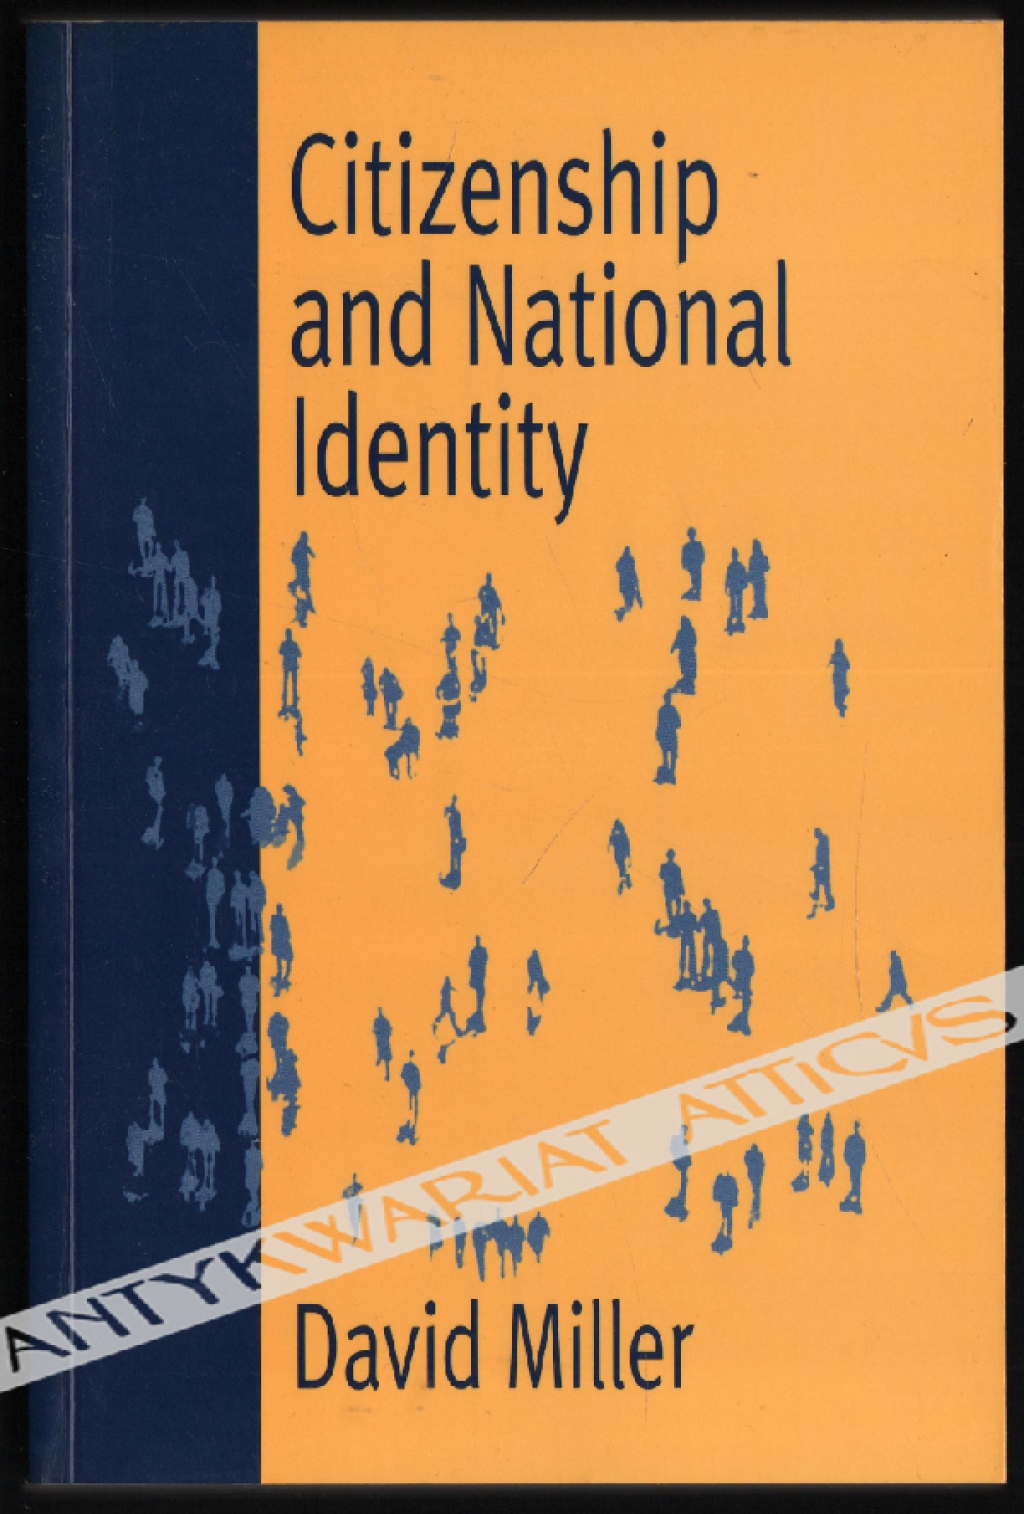 Citizenship and National Identity